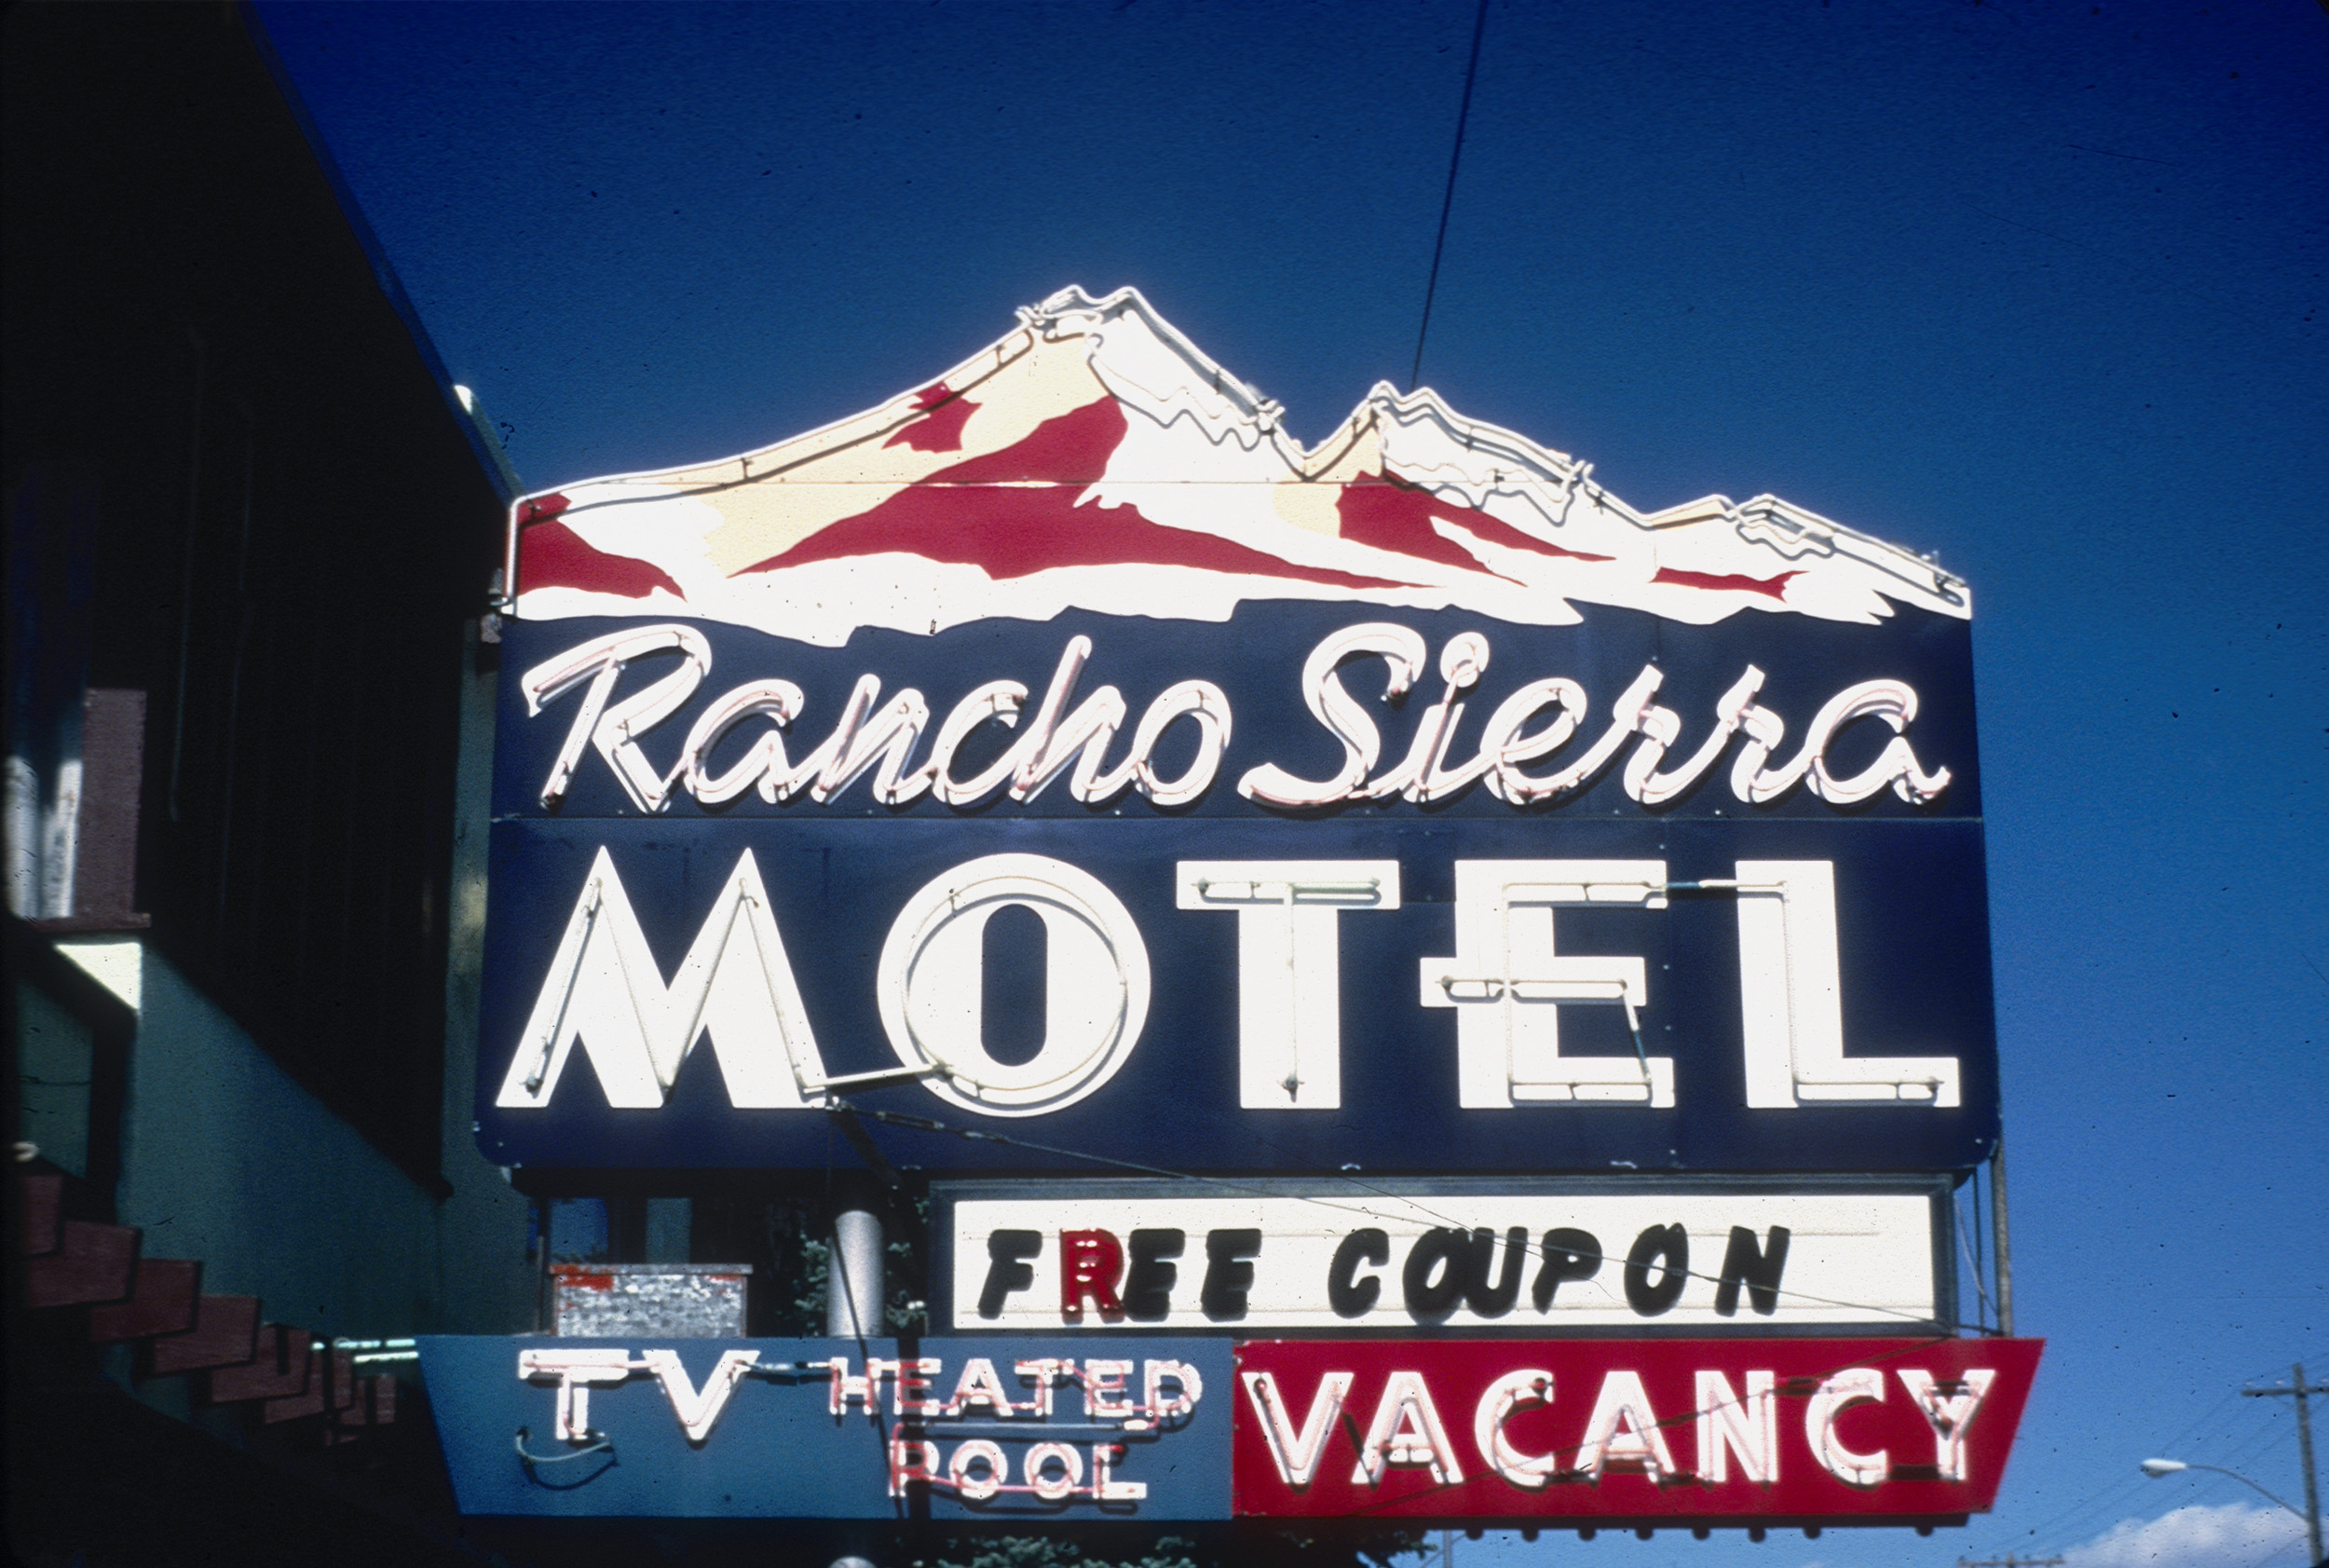 Slide of the neon sign for the Rancho Sierra Motel, Reno, Nevada, 1986